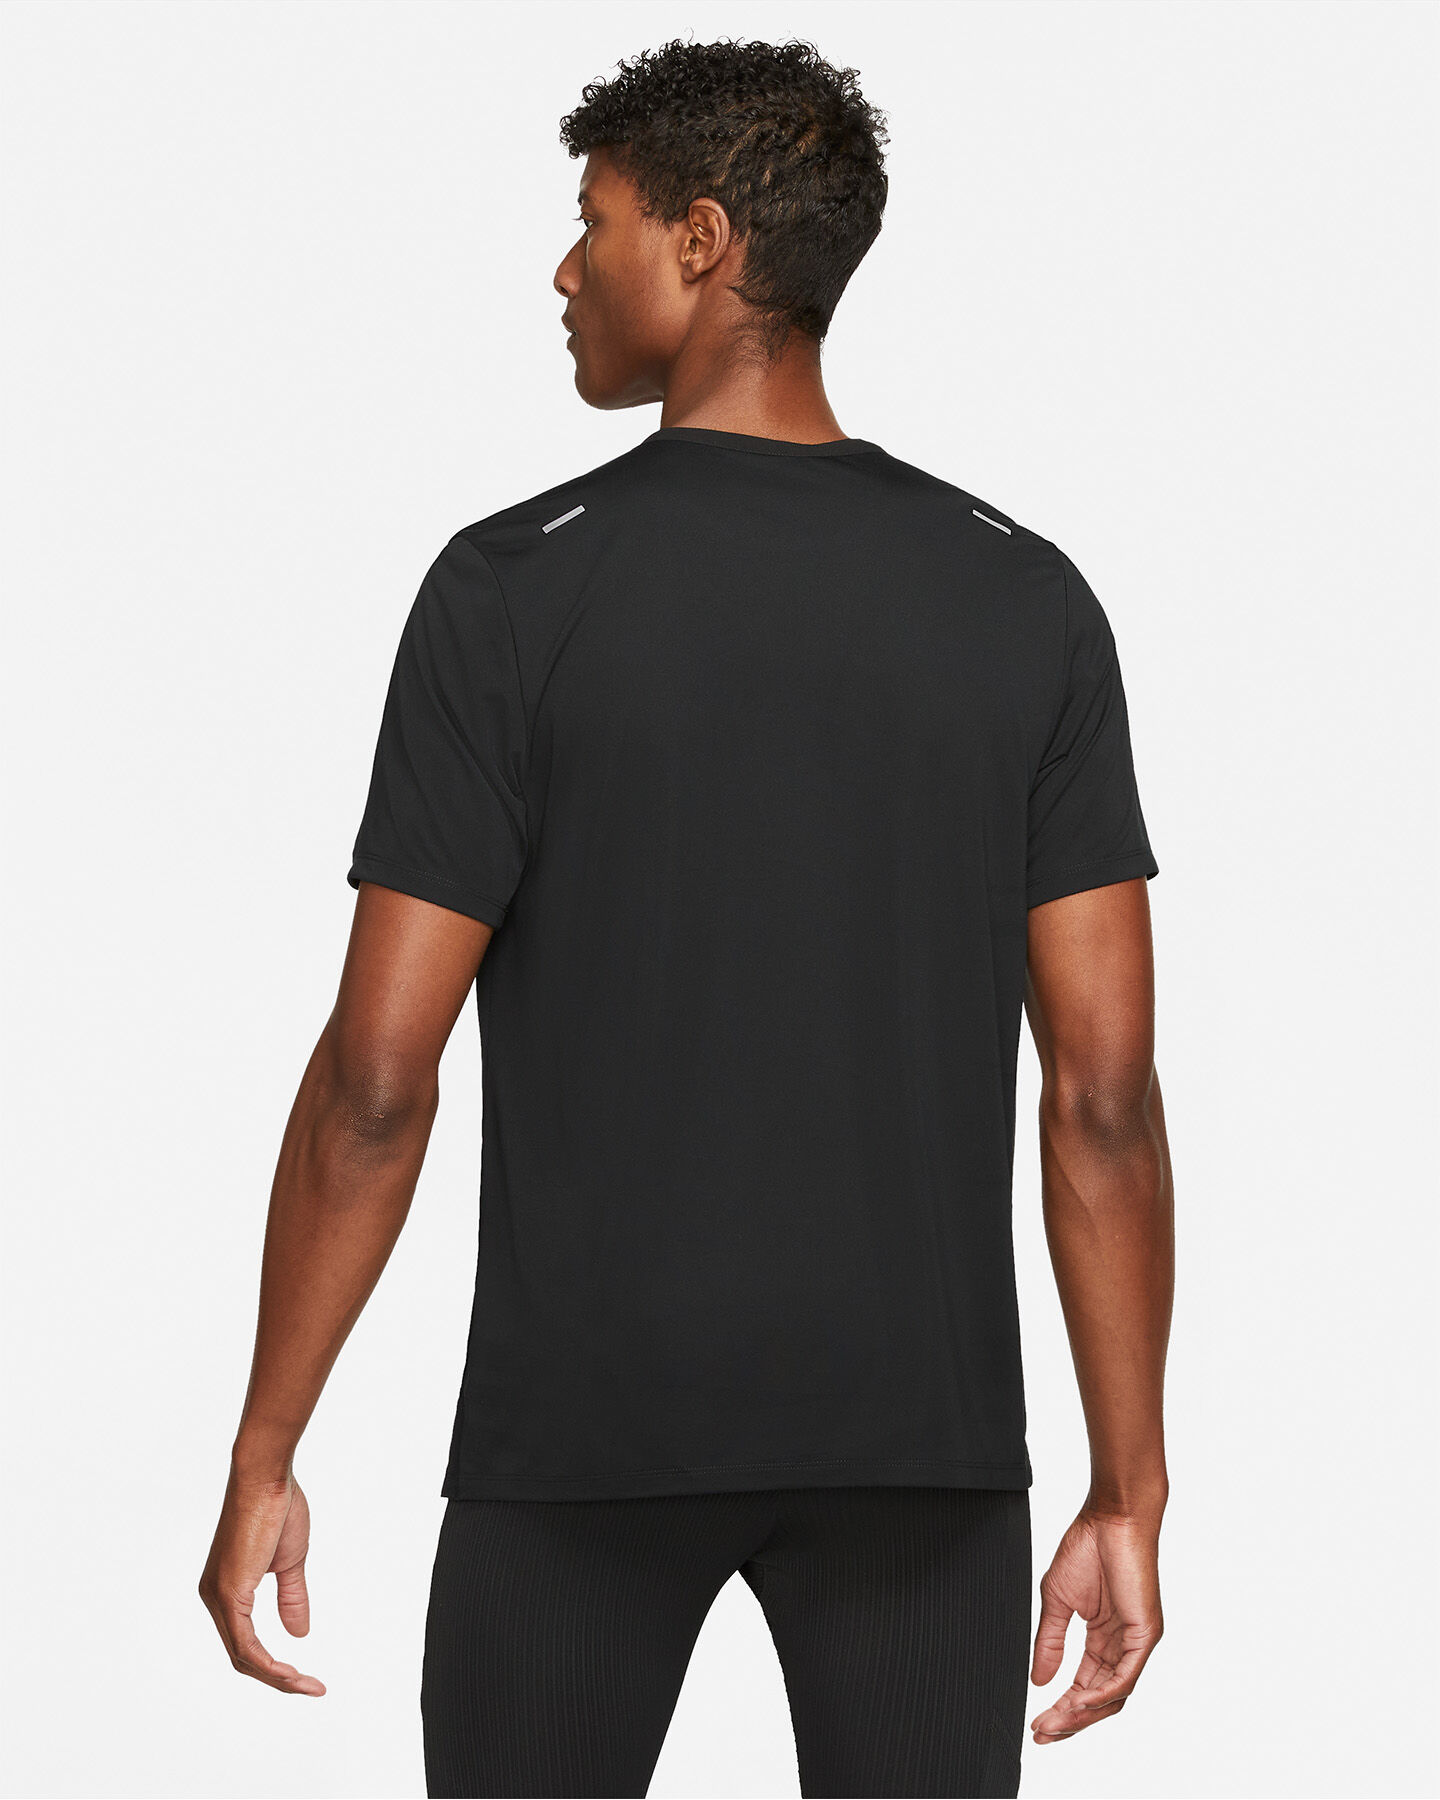  T-Shirt running NIKE RISE 365 M S5299231|013|S scatto 3